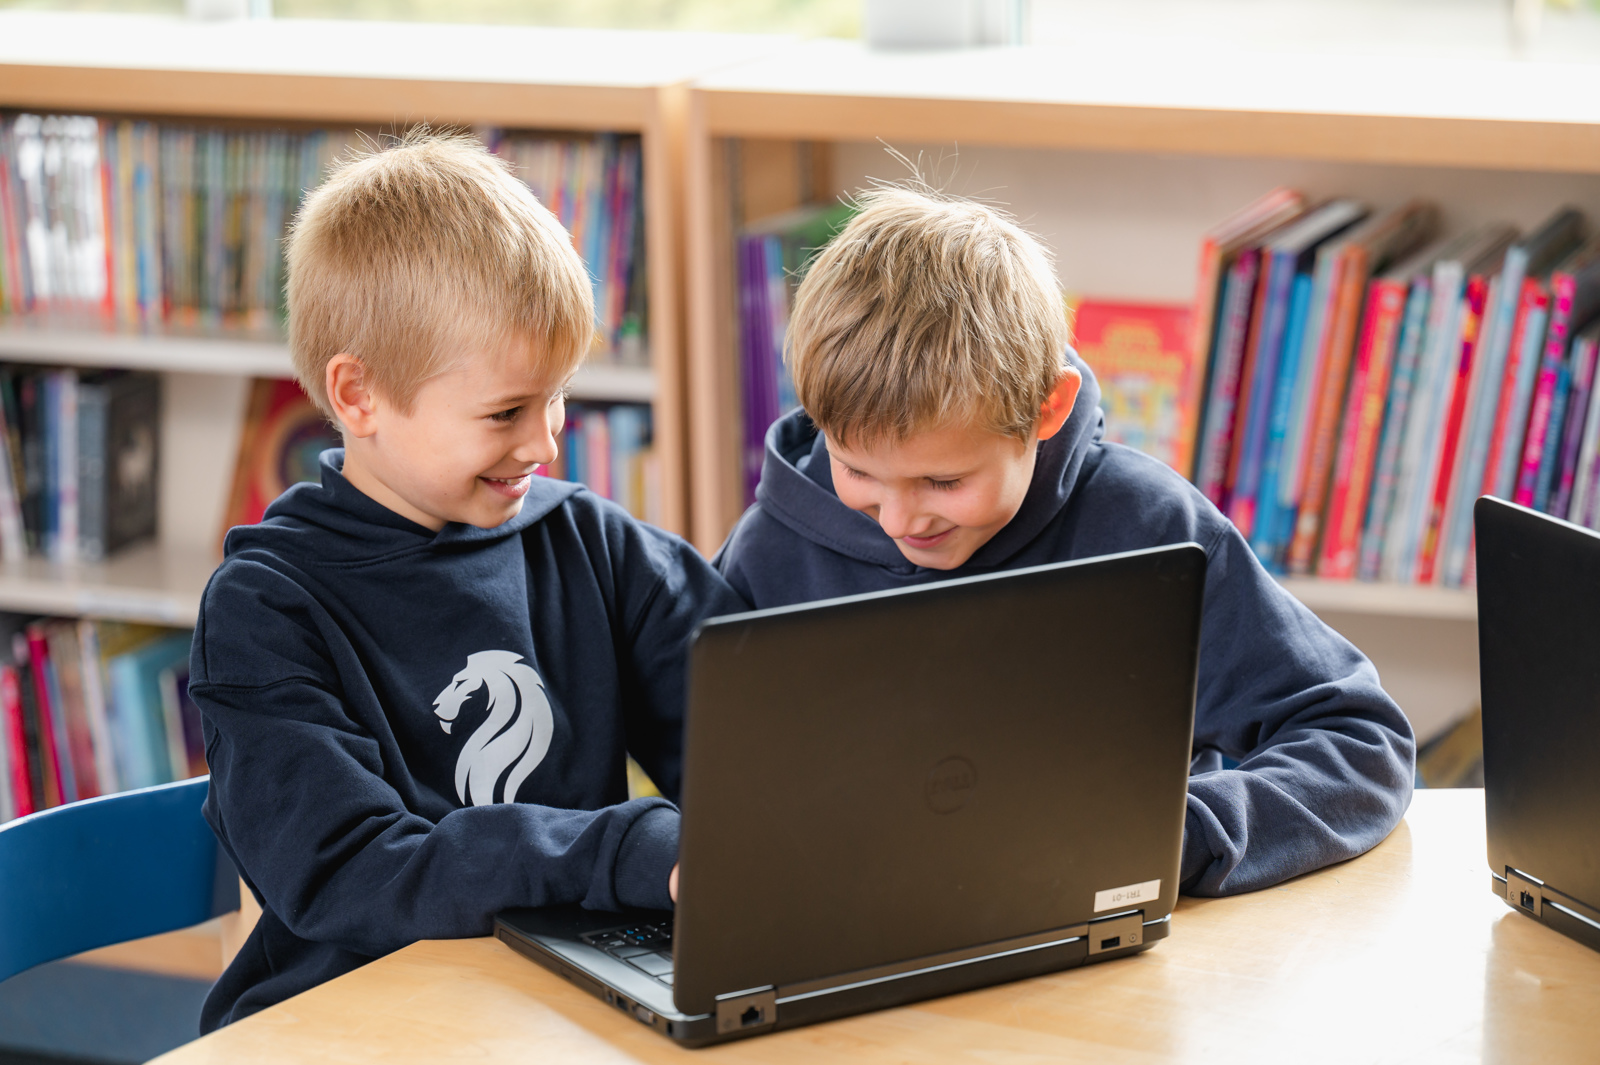 Two boys sit next to each other, sharing a laptop to complete an ICT learning task together.